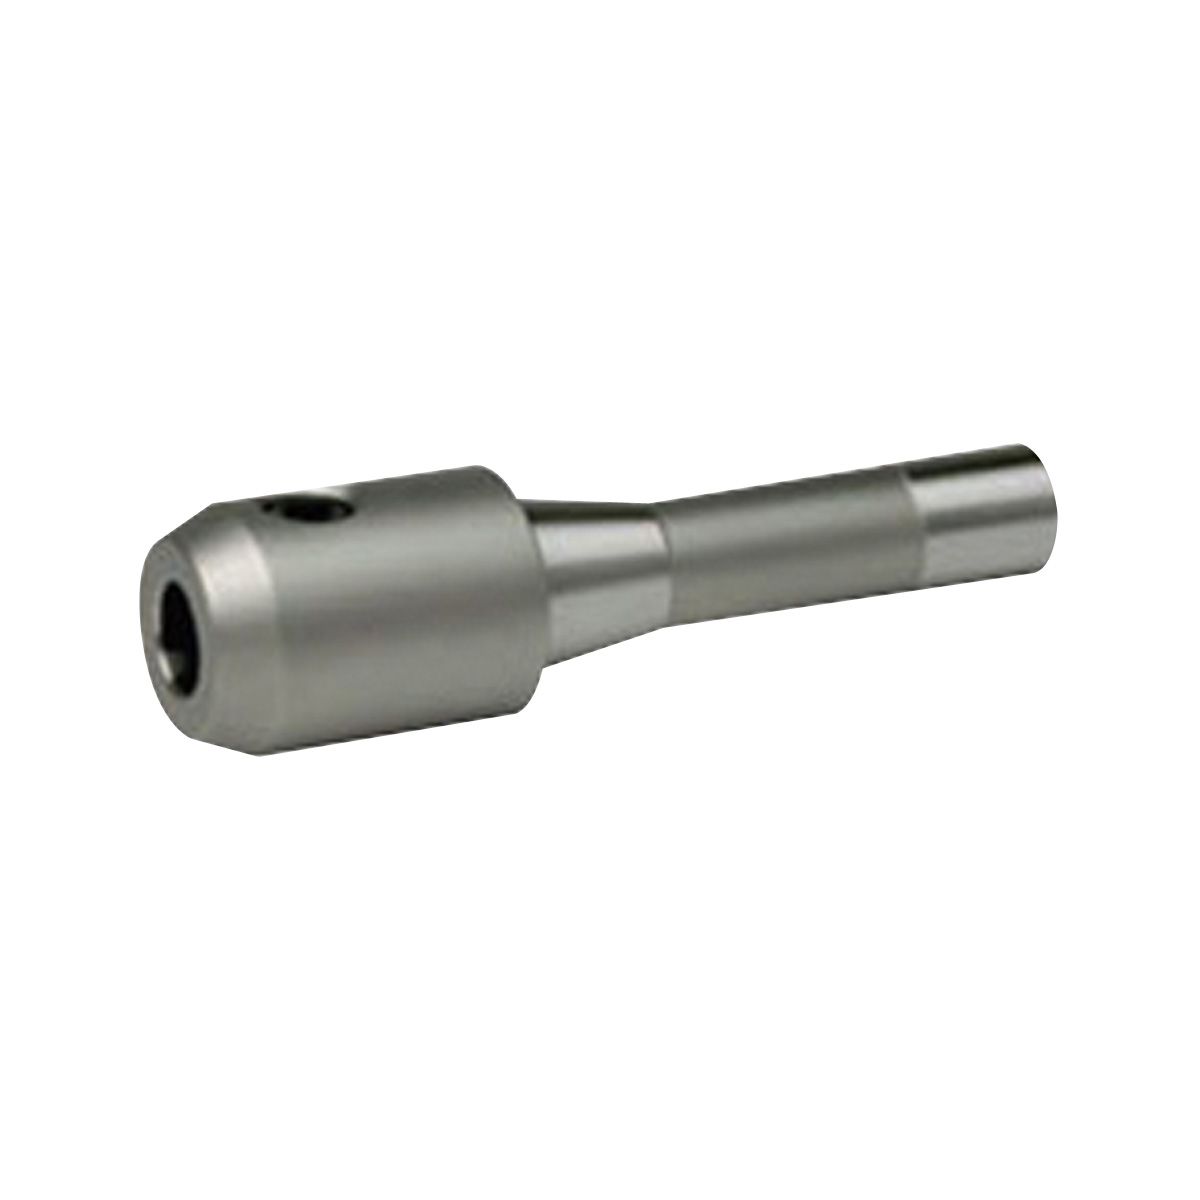 5/16" R8 END MILL HOLDER-PRO SERIES  (3901-0103)